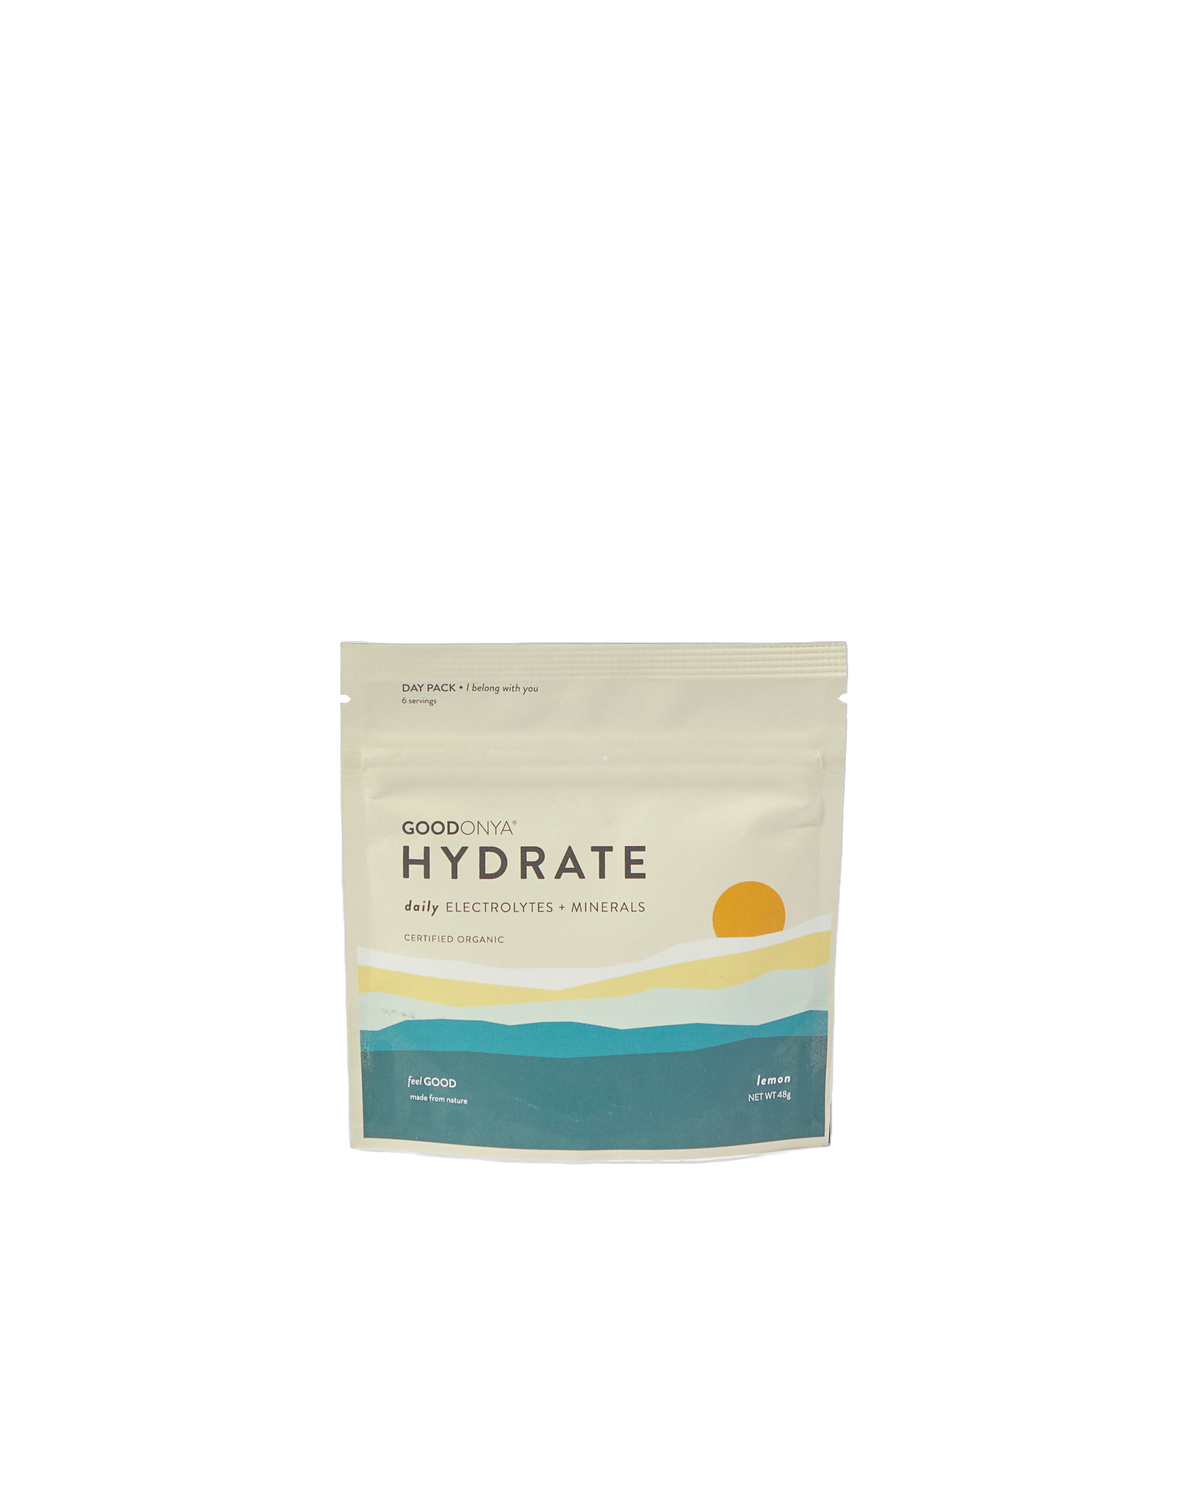 GOODONYA HYDRATE • ELECTROLYTE + MINERAL Powder Day Pack Subscription